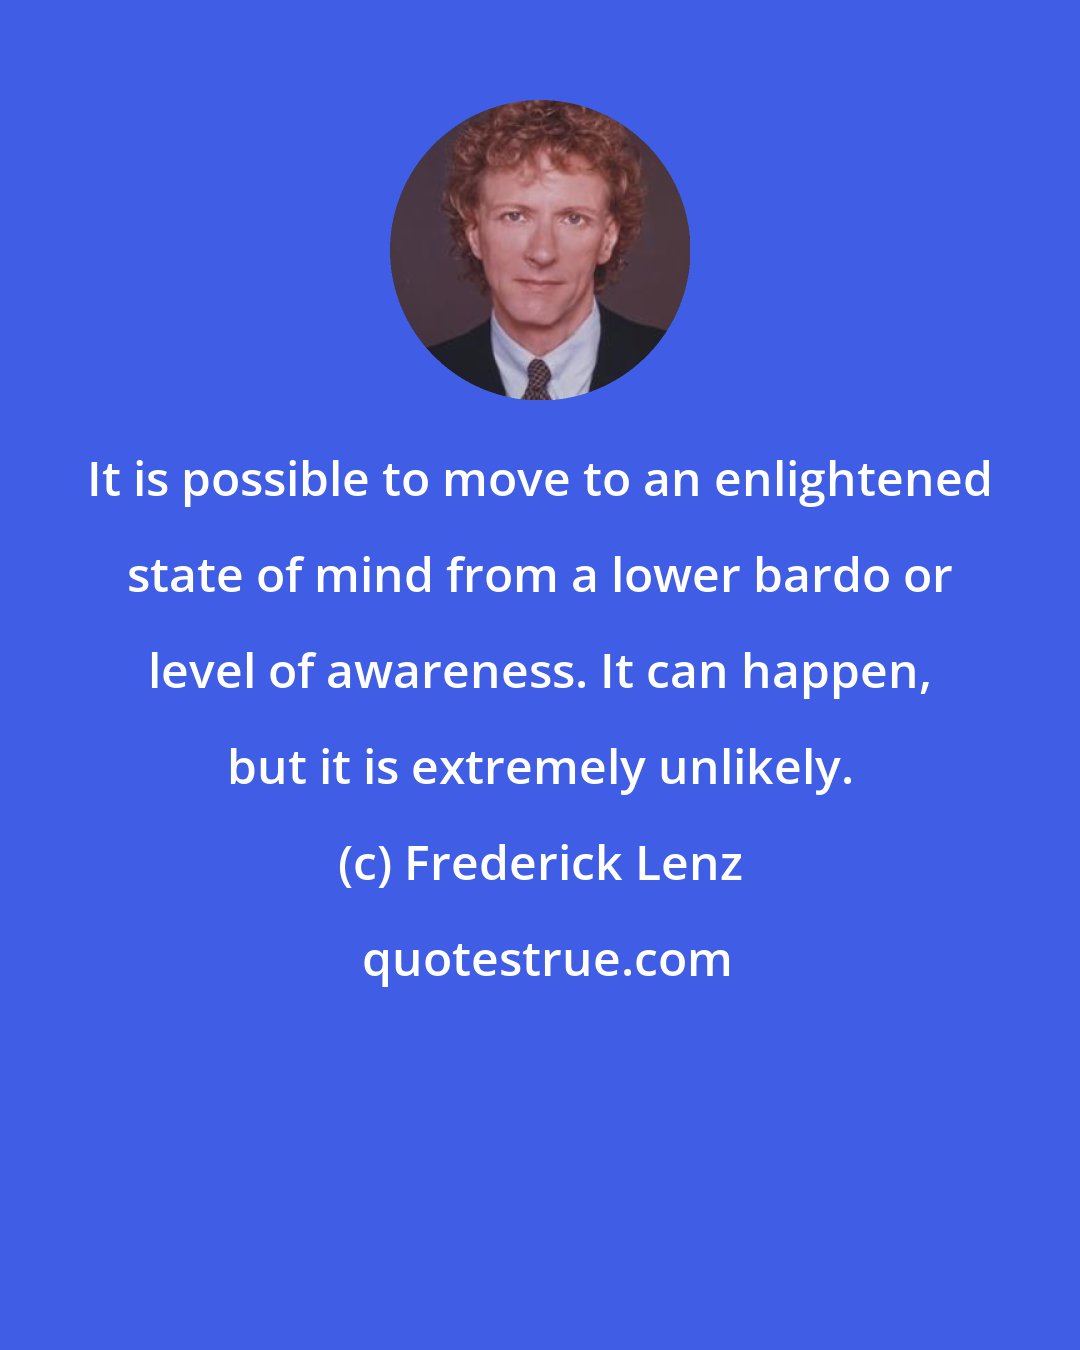 Frederick Lenz: It is possible to move to an enlightened state of mind from a lower bardo or level of awareness. It can happen, but it is extremely unlikely.